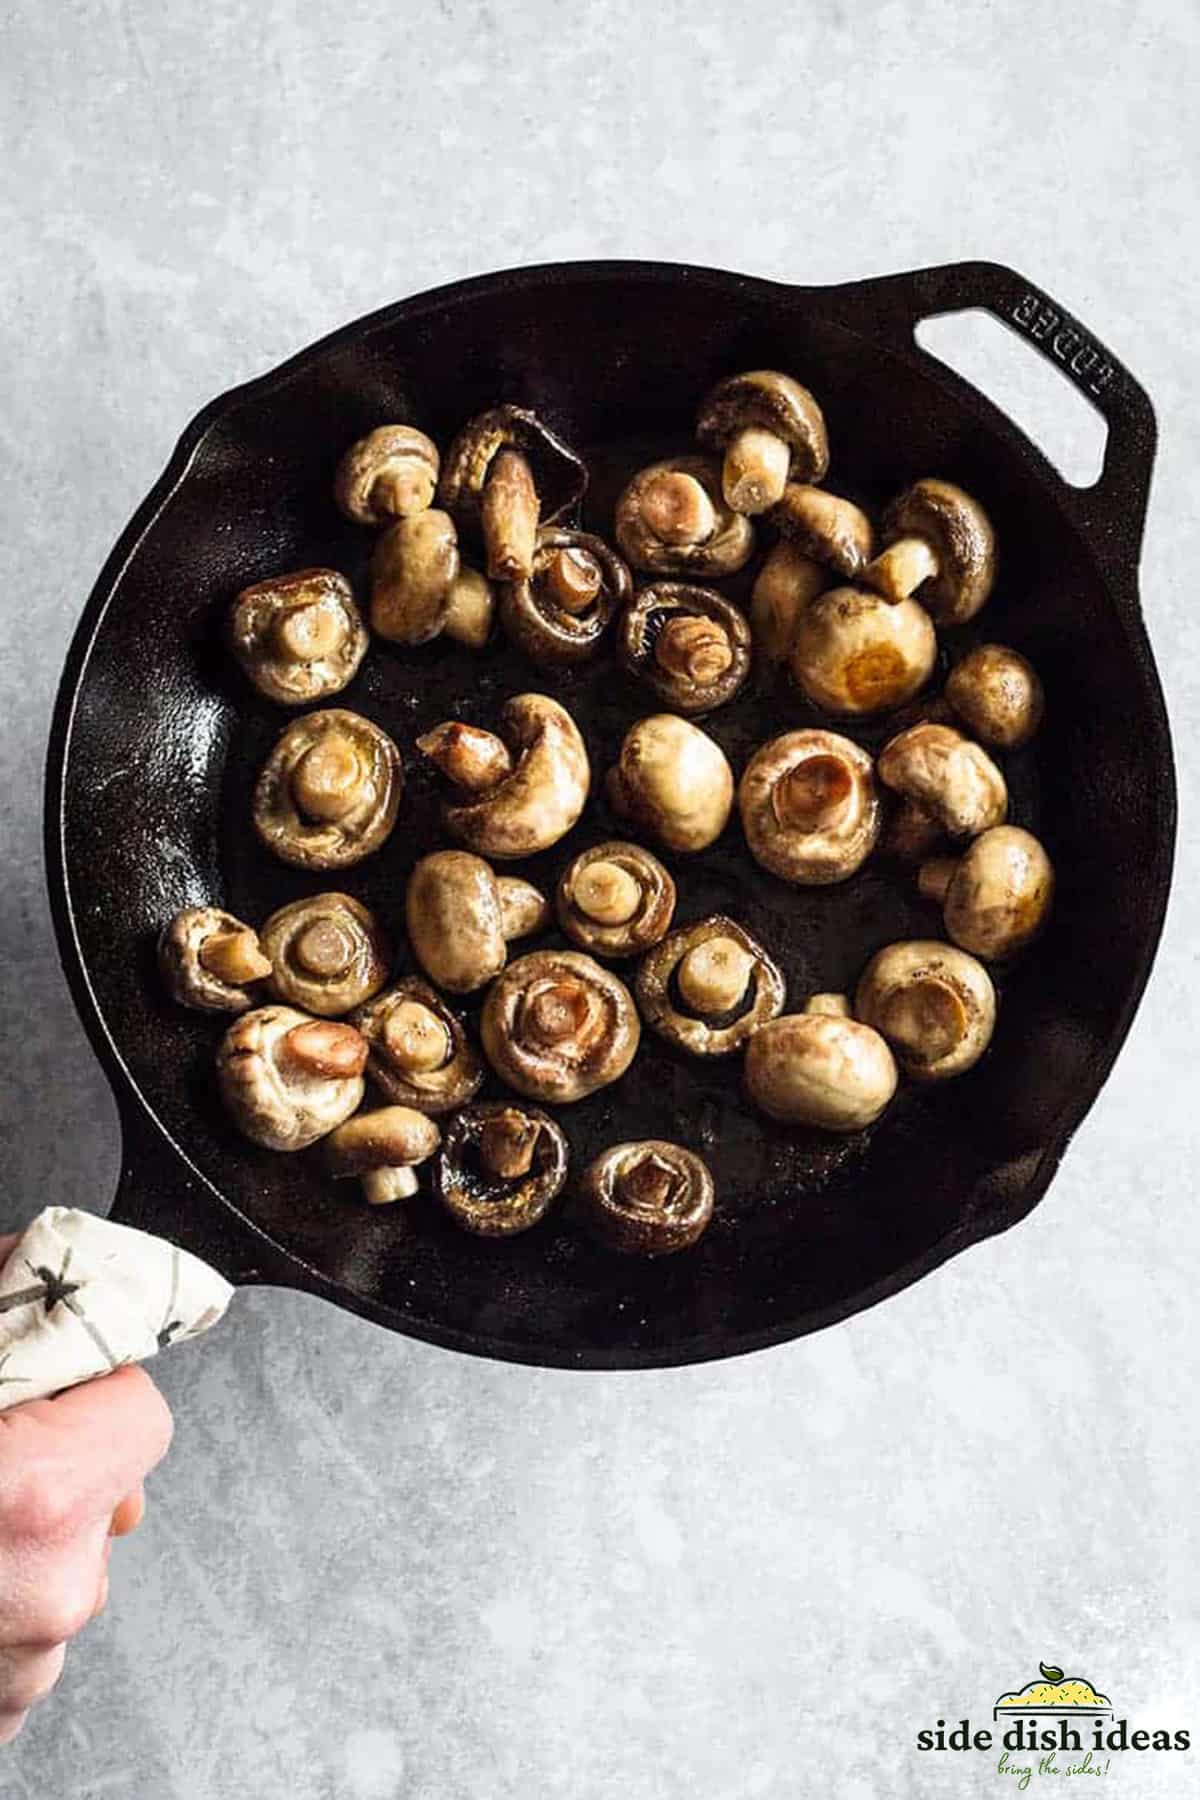 cooking white button mushrooms in a skillet